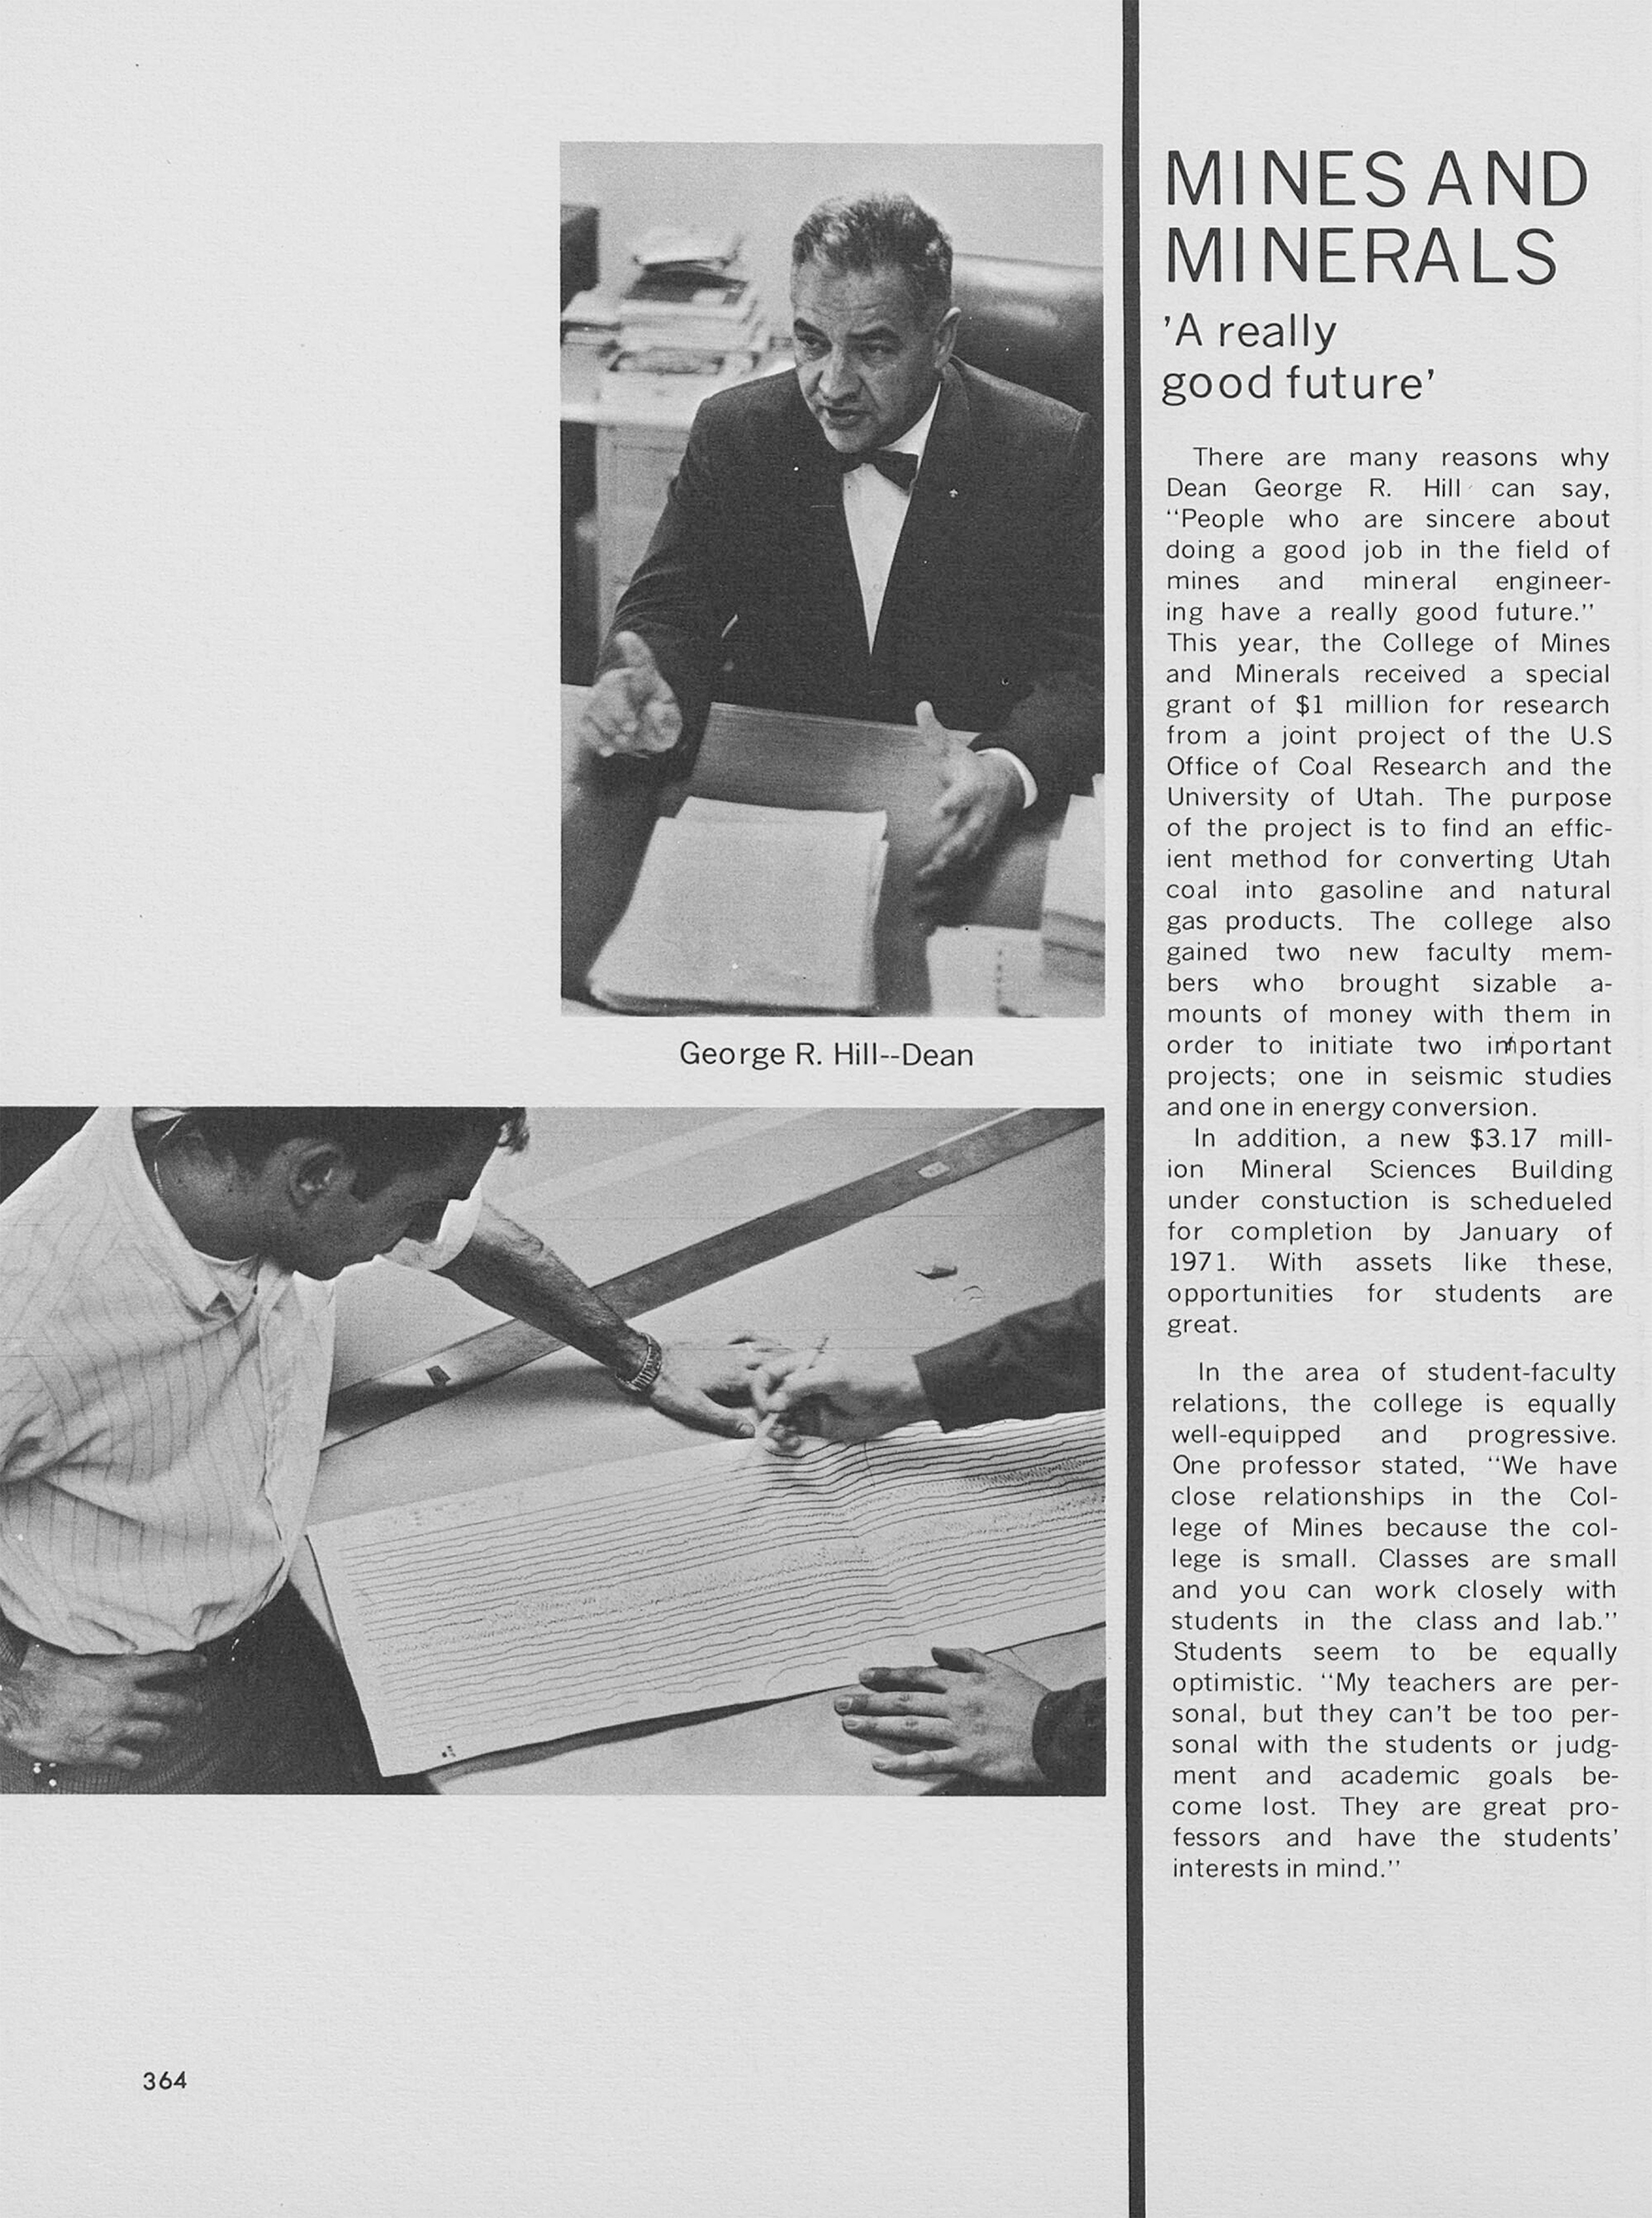 University of Utah Utonian, 1969-1970, page 364. Special Collections, J. Willard Marriott Library, the University of Utah. Mines and Minerals a Really Good Future an article about Dean George R. Hill. 